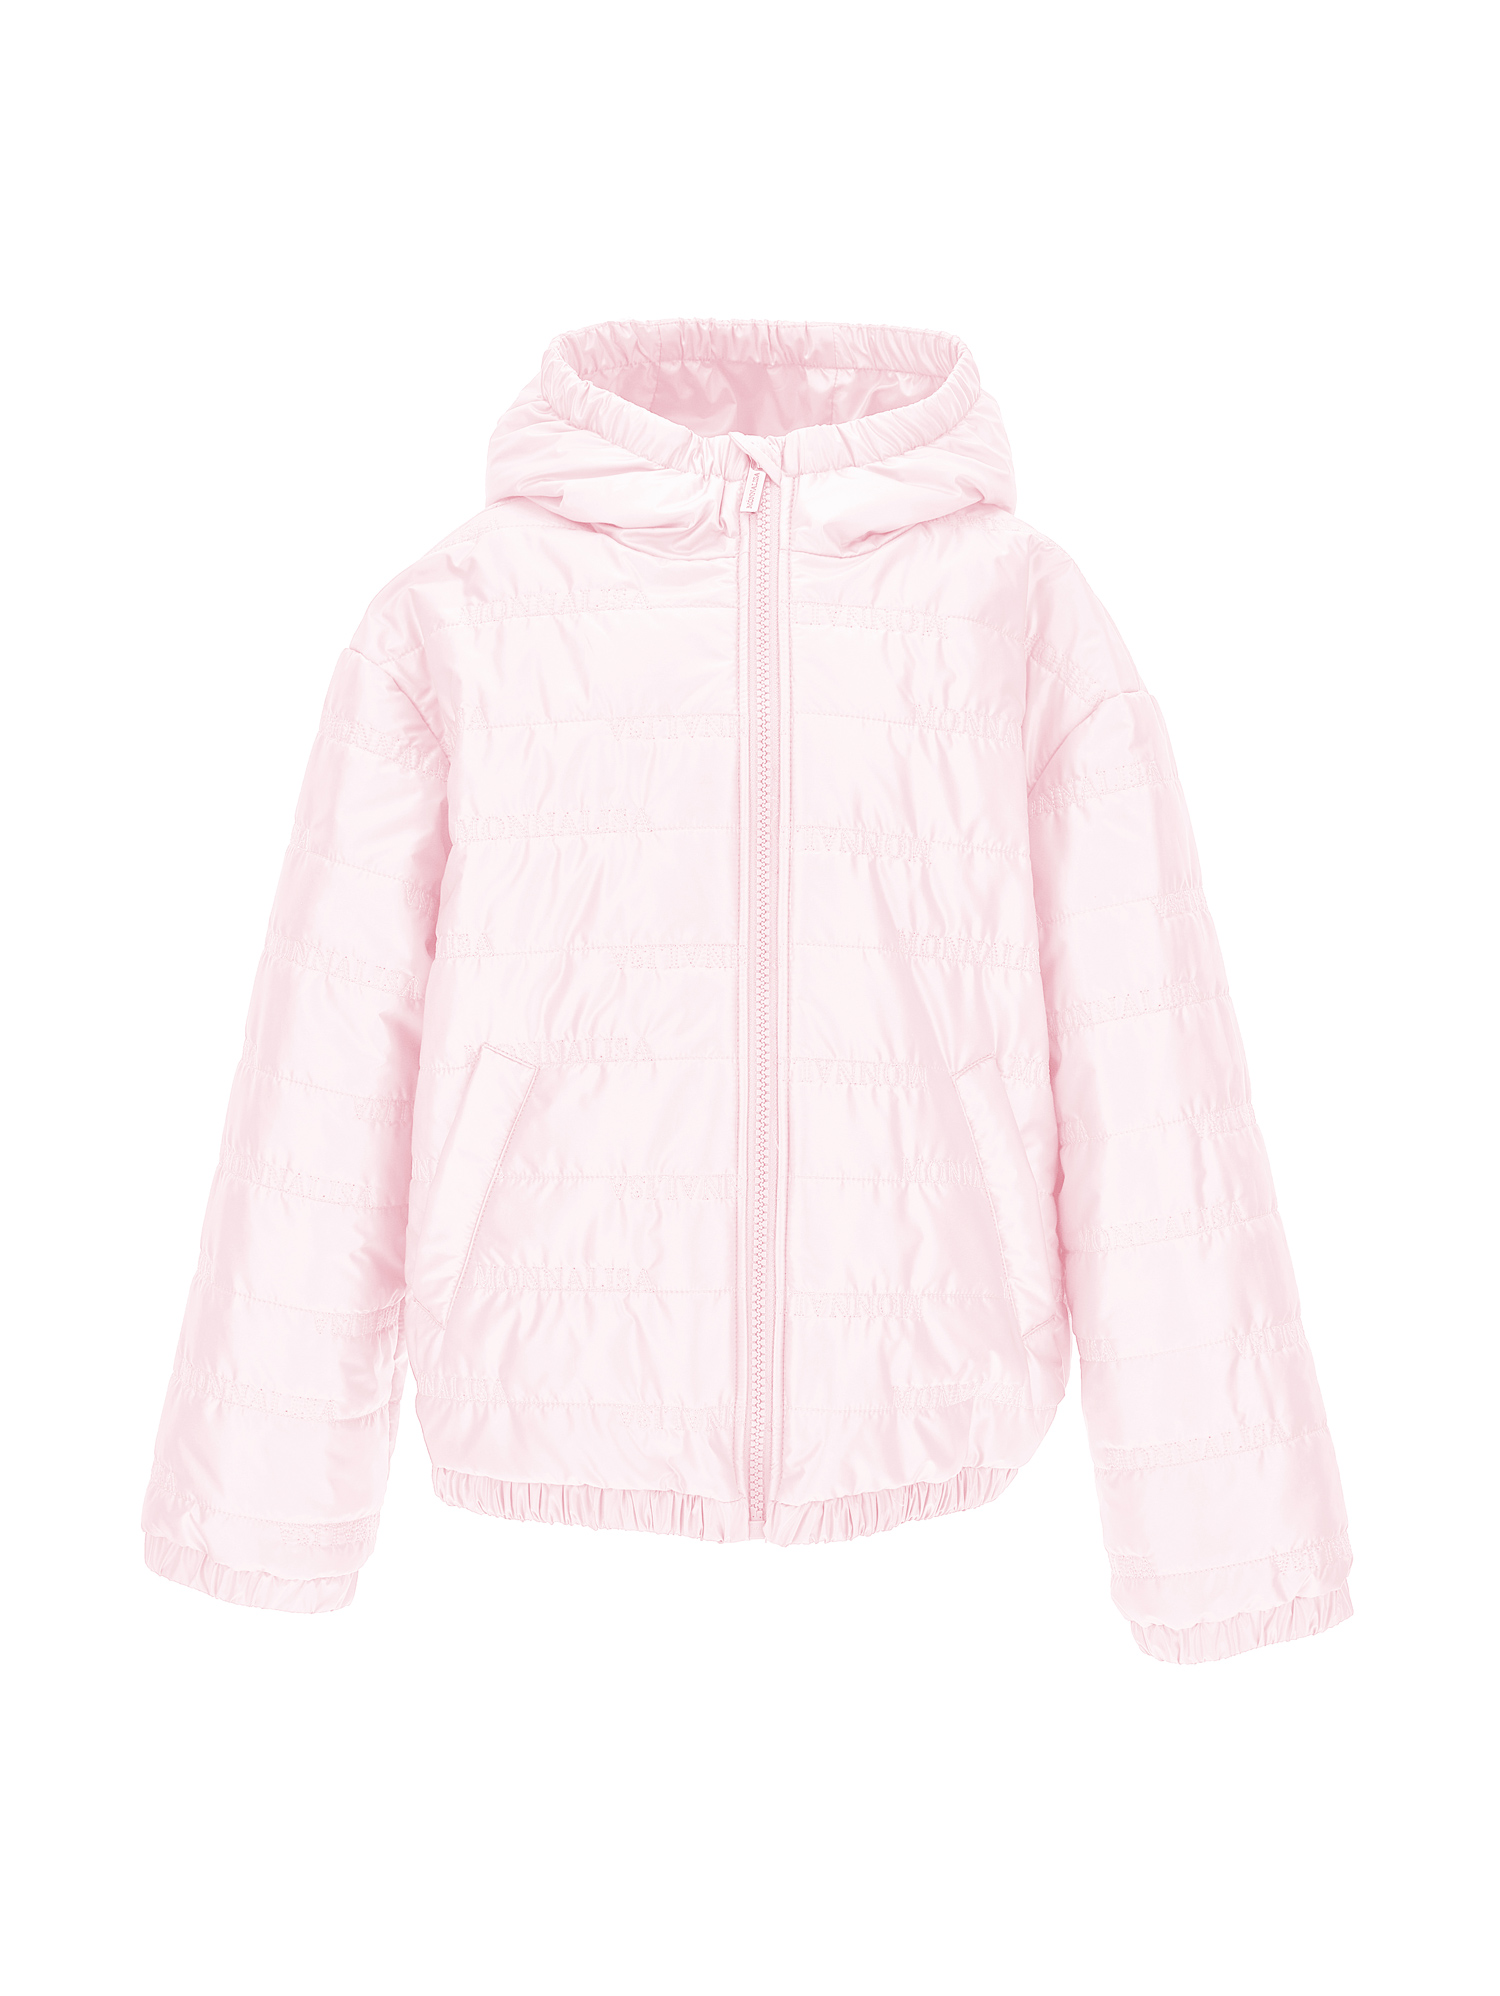 Monnalisa Quilted Extralight Jacket In Dusty Pink Rose